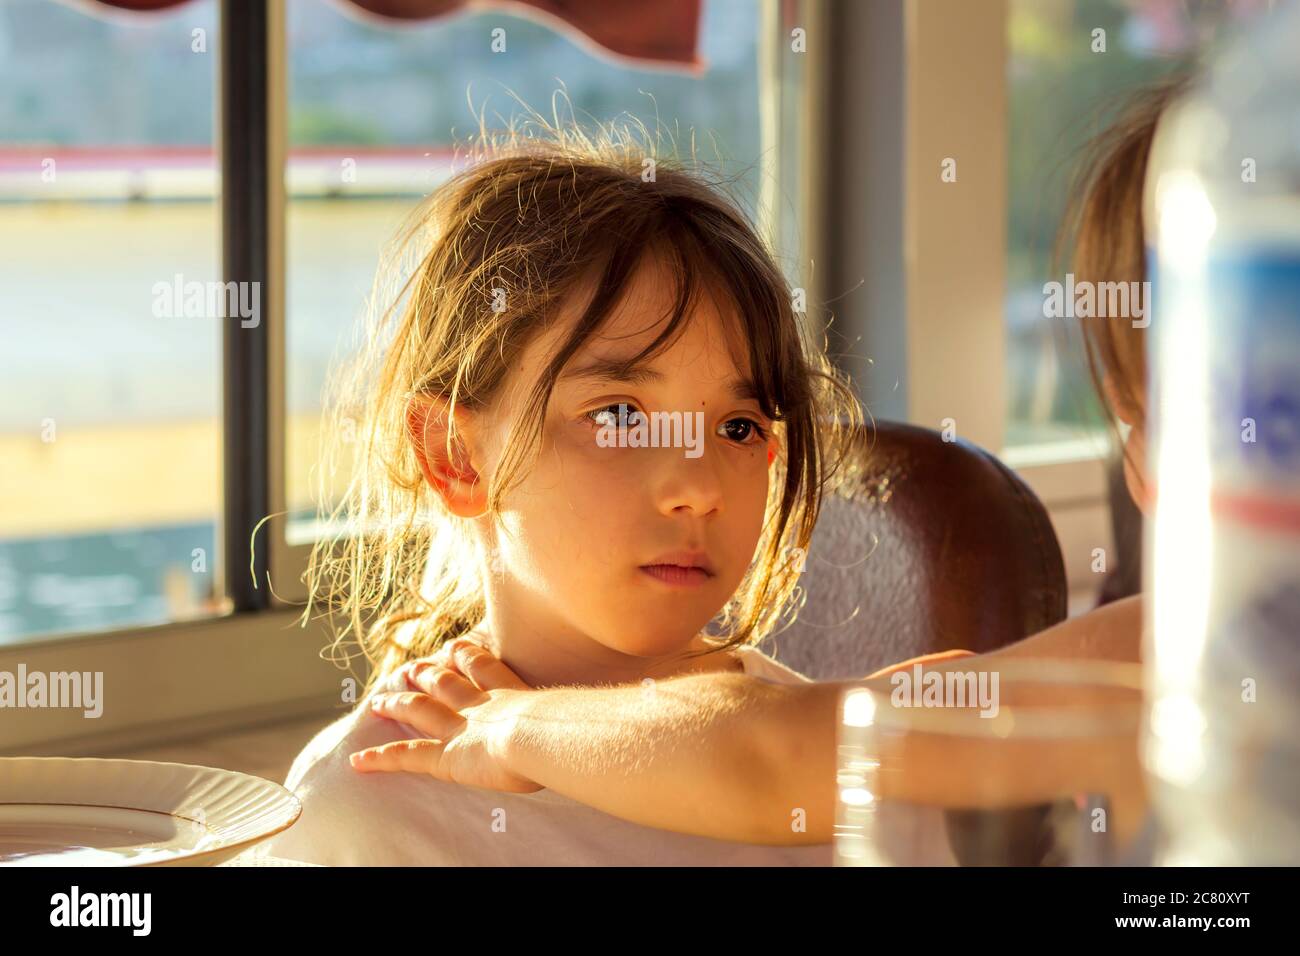 unhappy and tired girl. the little girl is exposed to peer bullying. Stock Photo